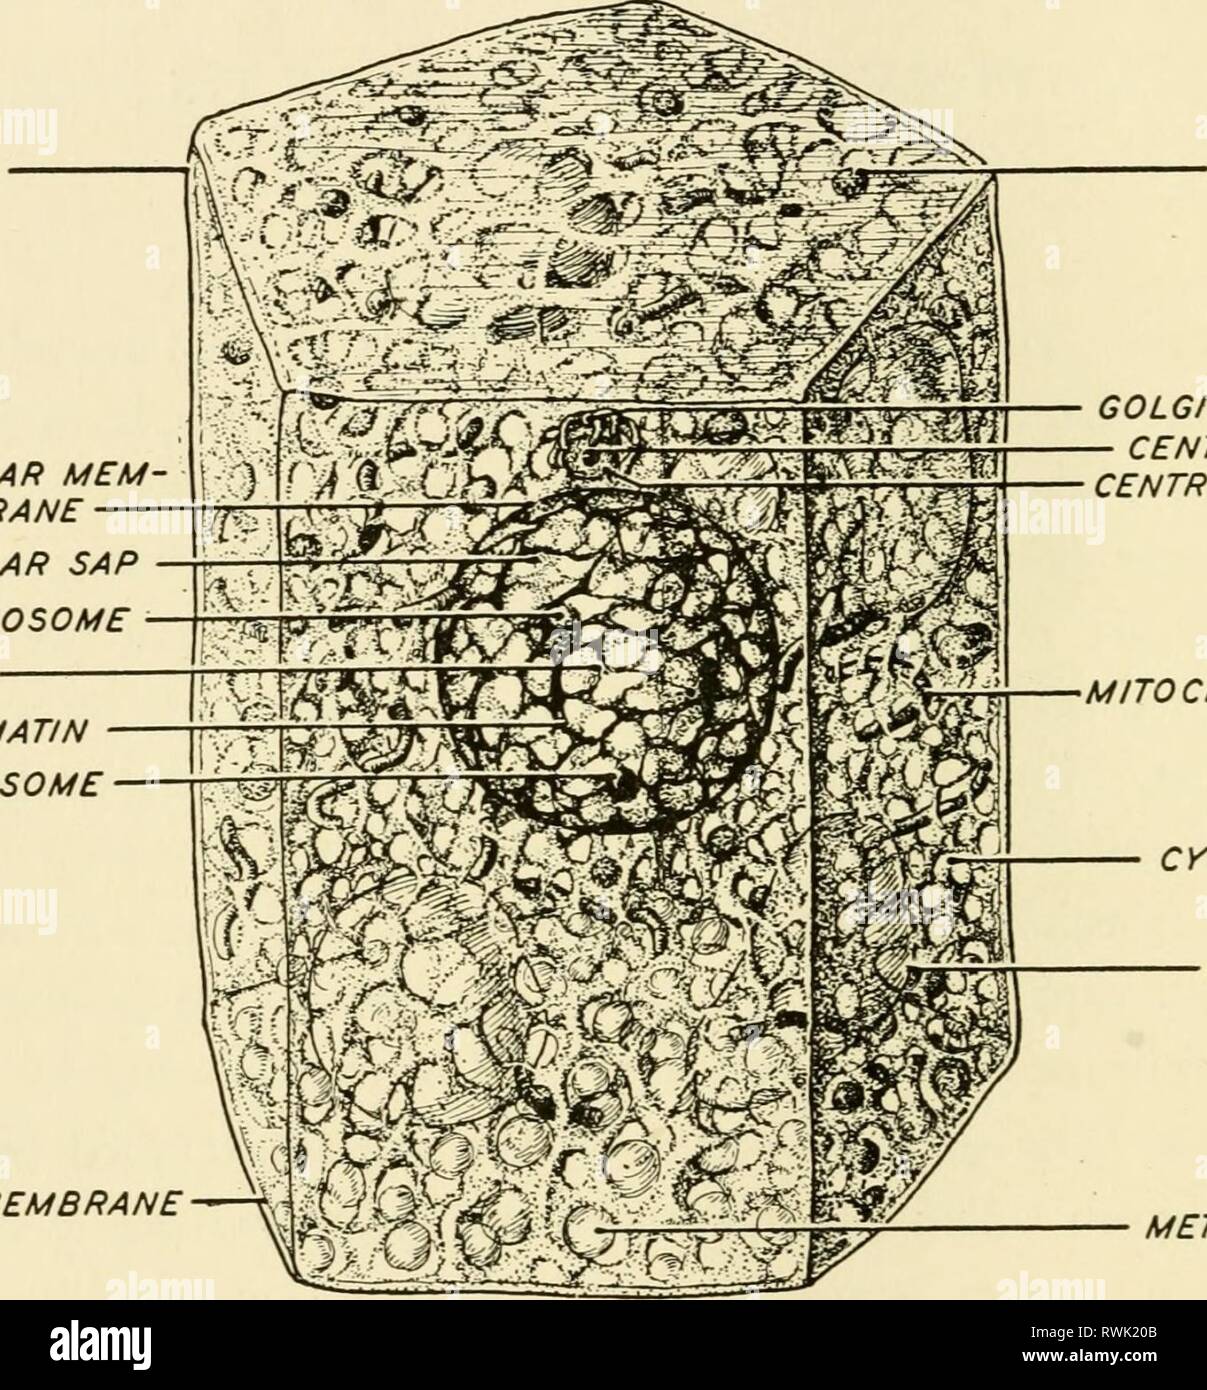 Elements of biology, with special Elements of biology, with special reference to their rôle in the lives of animals elementsofbiolog00buch Year: 1933  30 ELEMENTS OF BIOLOGY type of protoplasm, although it is continuous with the underlying substance. This boundary, known as the plasma membrane, may be, and in many cases is, surrounded by a non-living pellicle or cell WALL, formed by substances constructed by the chemical processes within the cell. CELL WALL N U C u s CHROMATIN KARYOSOME PLASMA MEMBRANE    NUCLEAR MEM BRANE NUCLEAR SAP PLASMOSOME LININ PLASTID GOLGI BODIES CENTROSOME CENTROSPHE Stock Photo